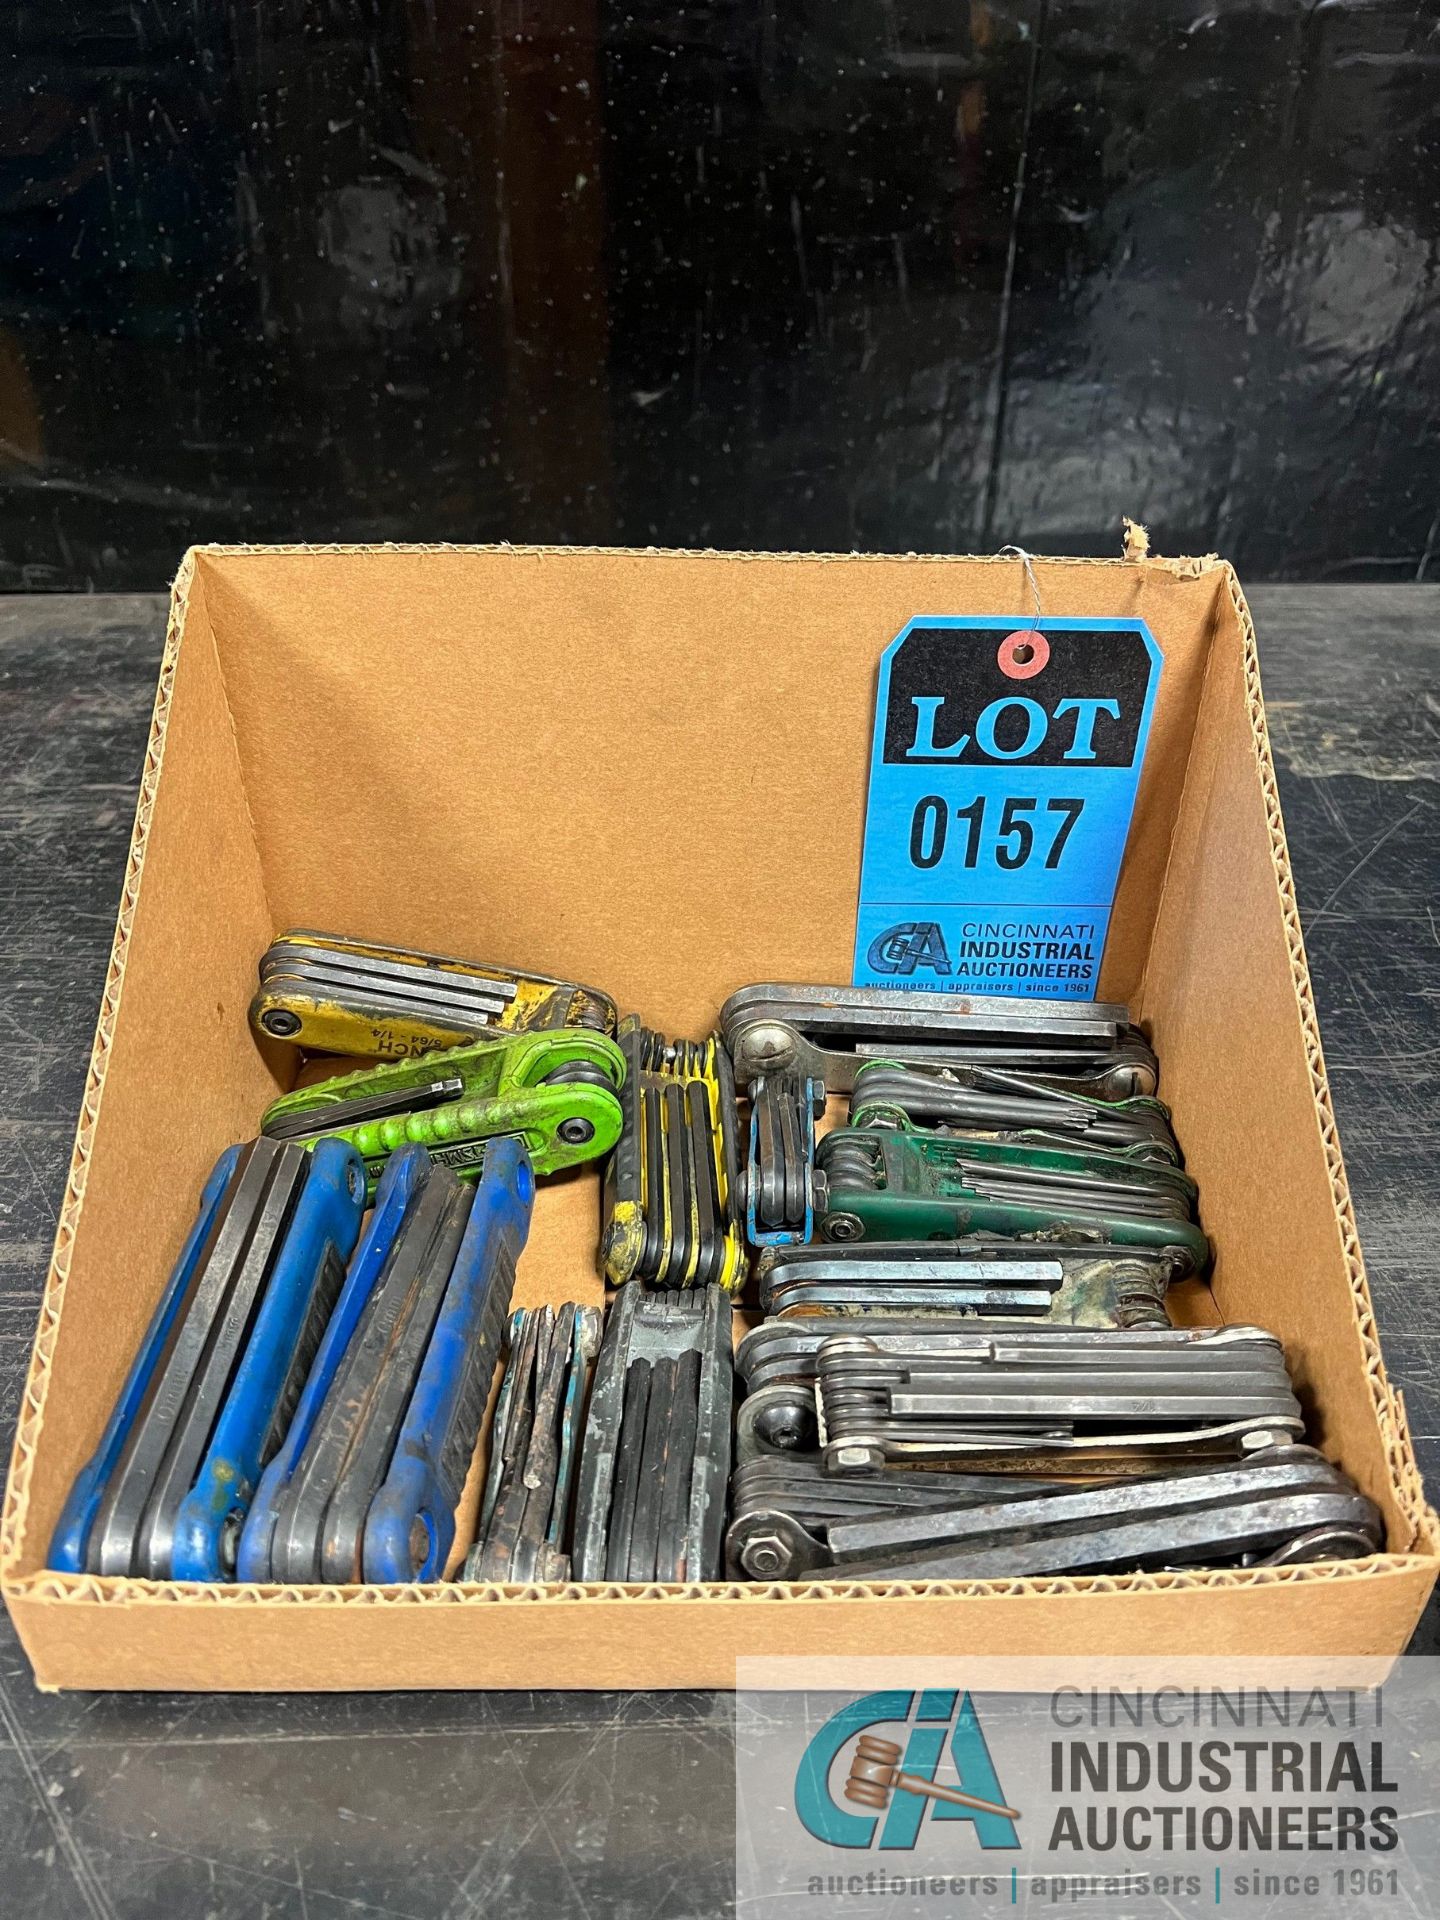 15 ASSORTED HEX KEY FOLDING SETS **LOCATED AT 235 FACTORY STREET, LA PORTE, INDIANA 46350**